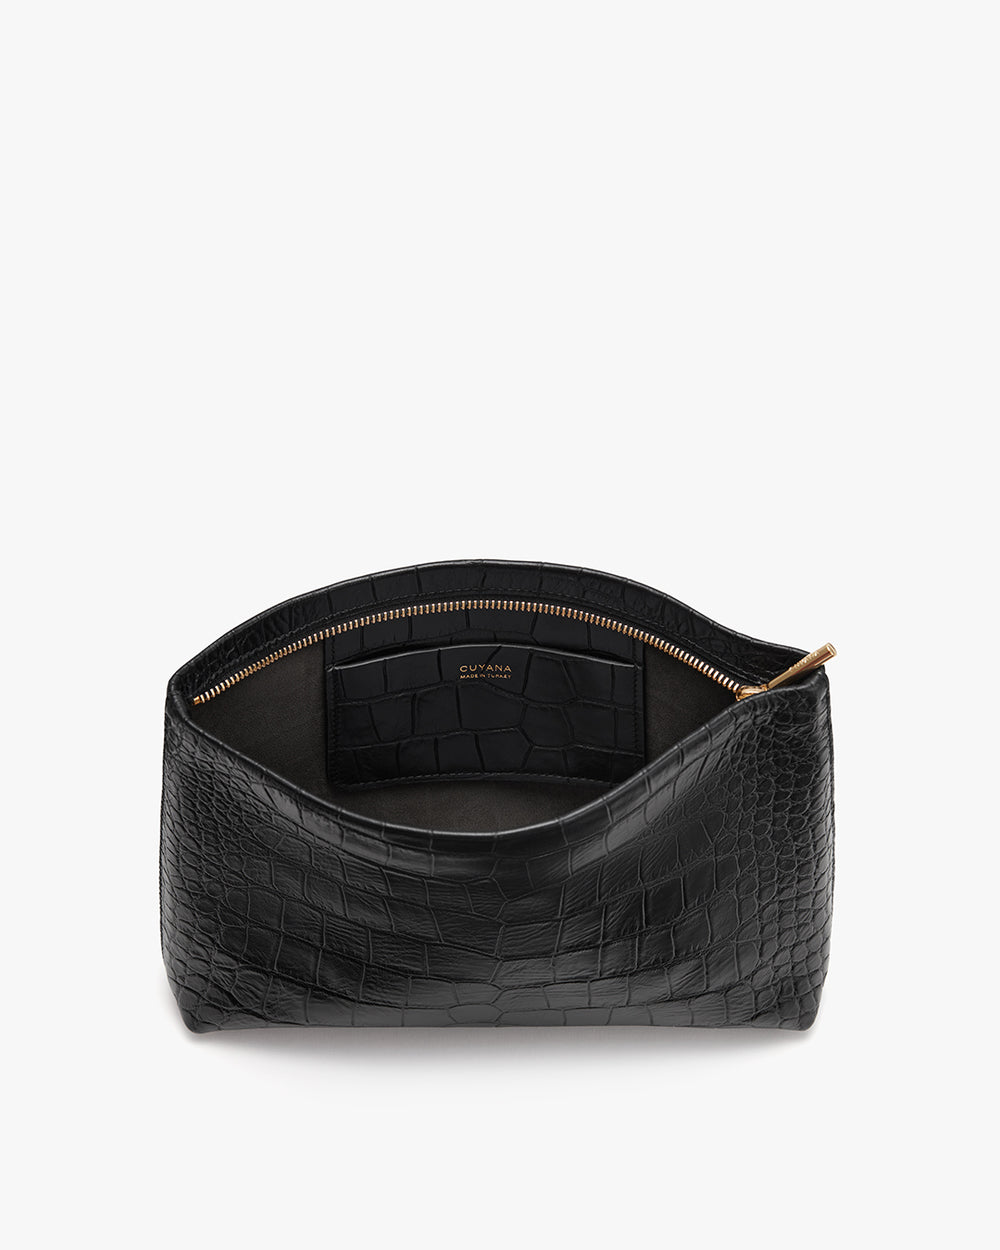 Open textured cosmetic pouch with zipper.